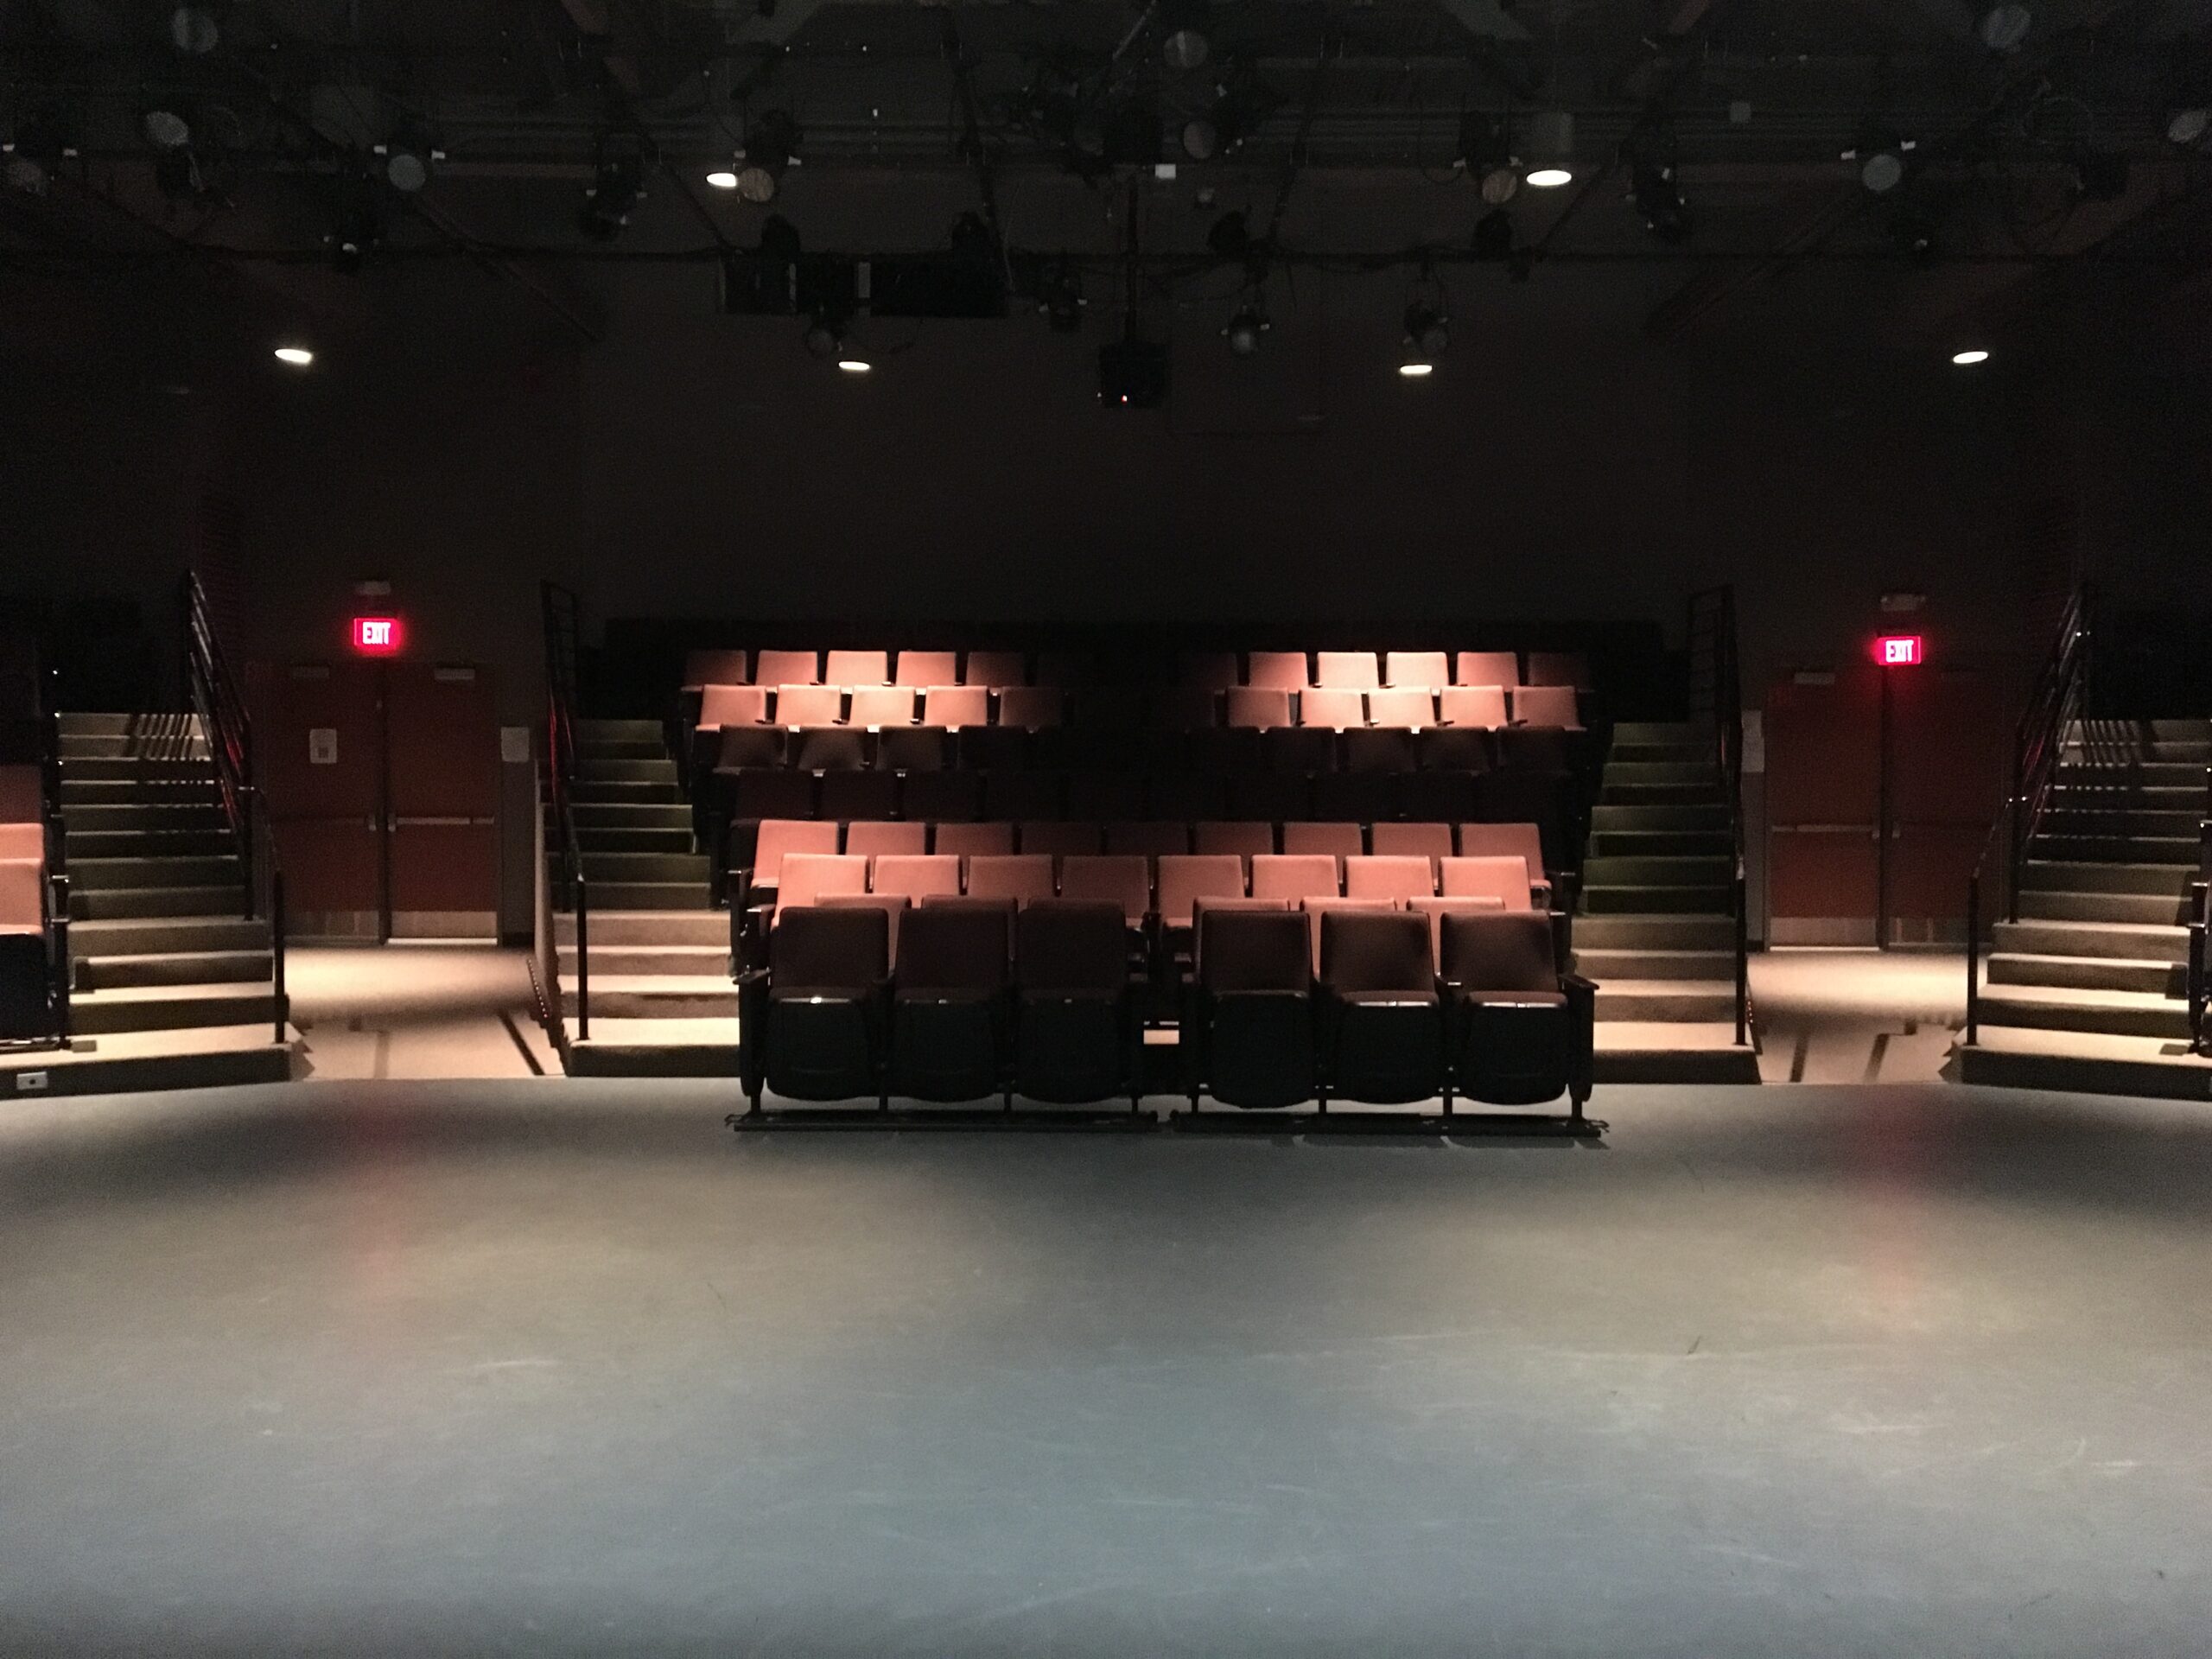 Image taken from the stage of an empty theatre looking out at the seating